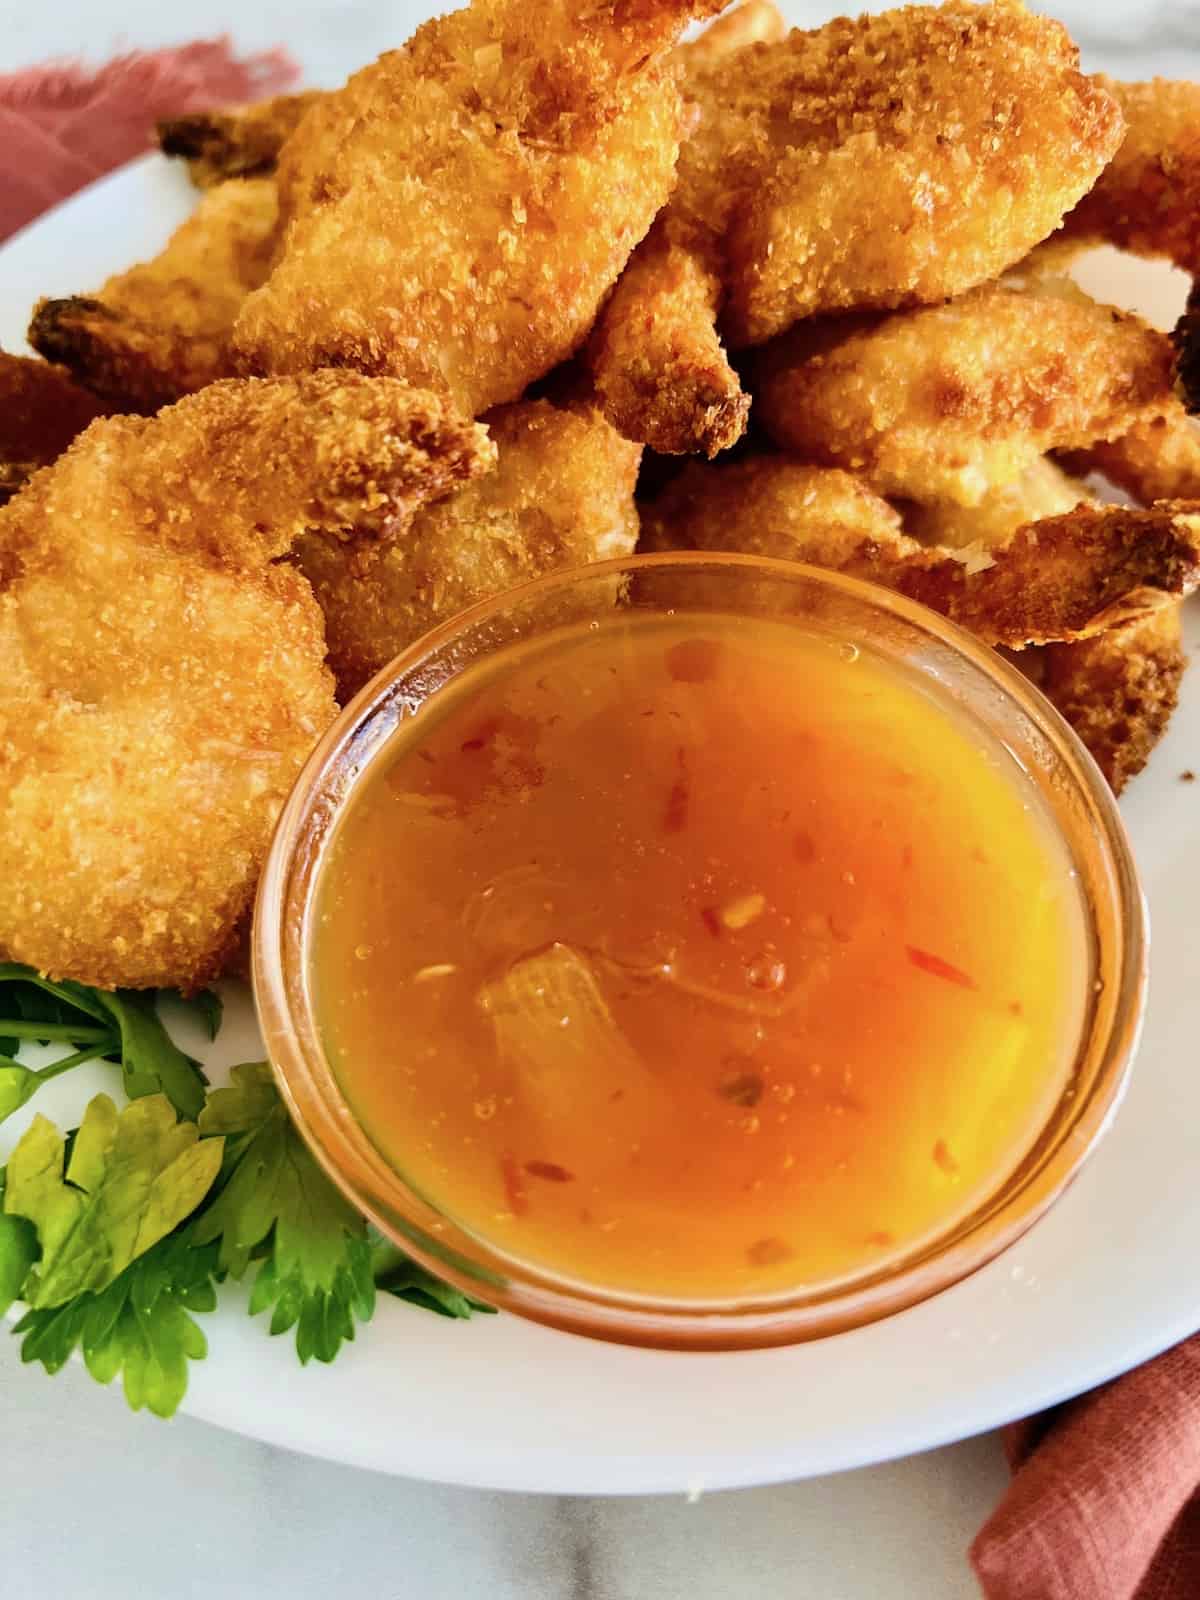 Tropical Appetizers - Finger Foods - Pineapple Dipping Sauce for Coconut Shrimp